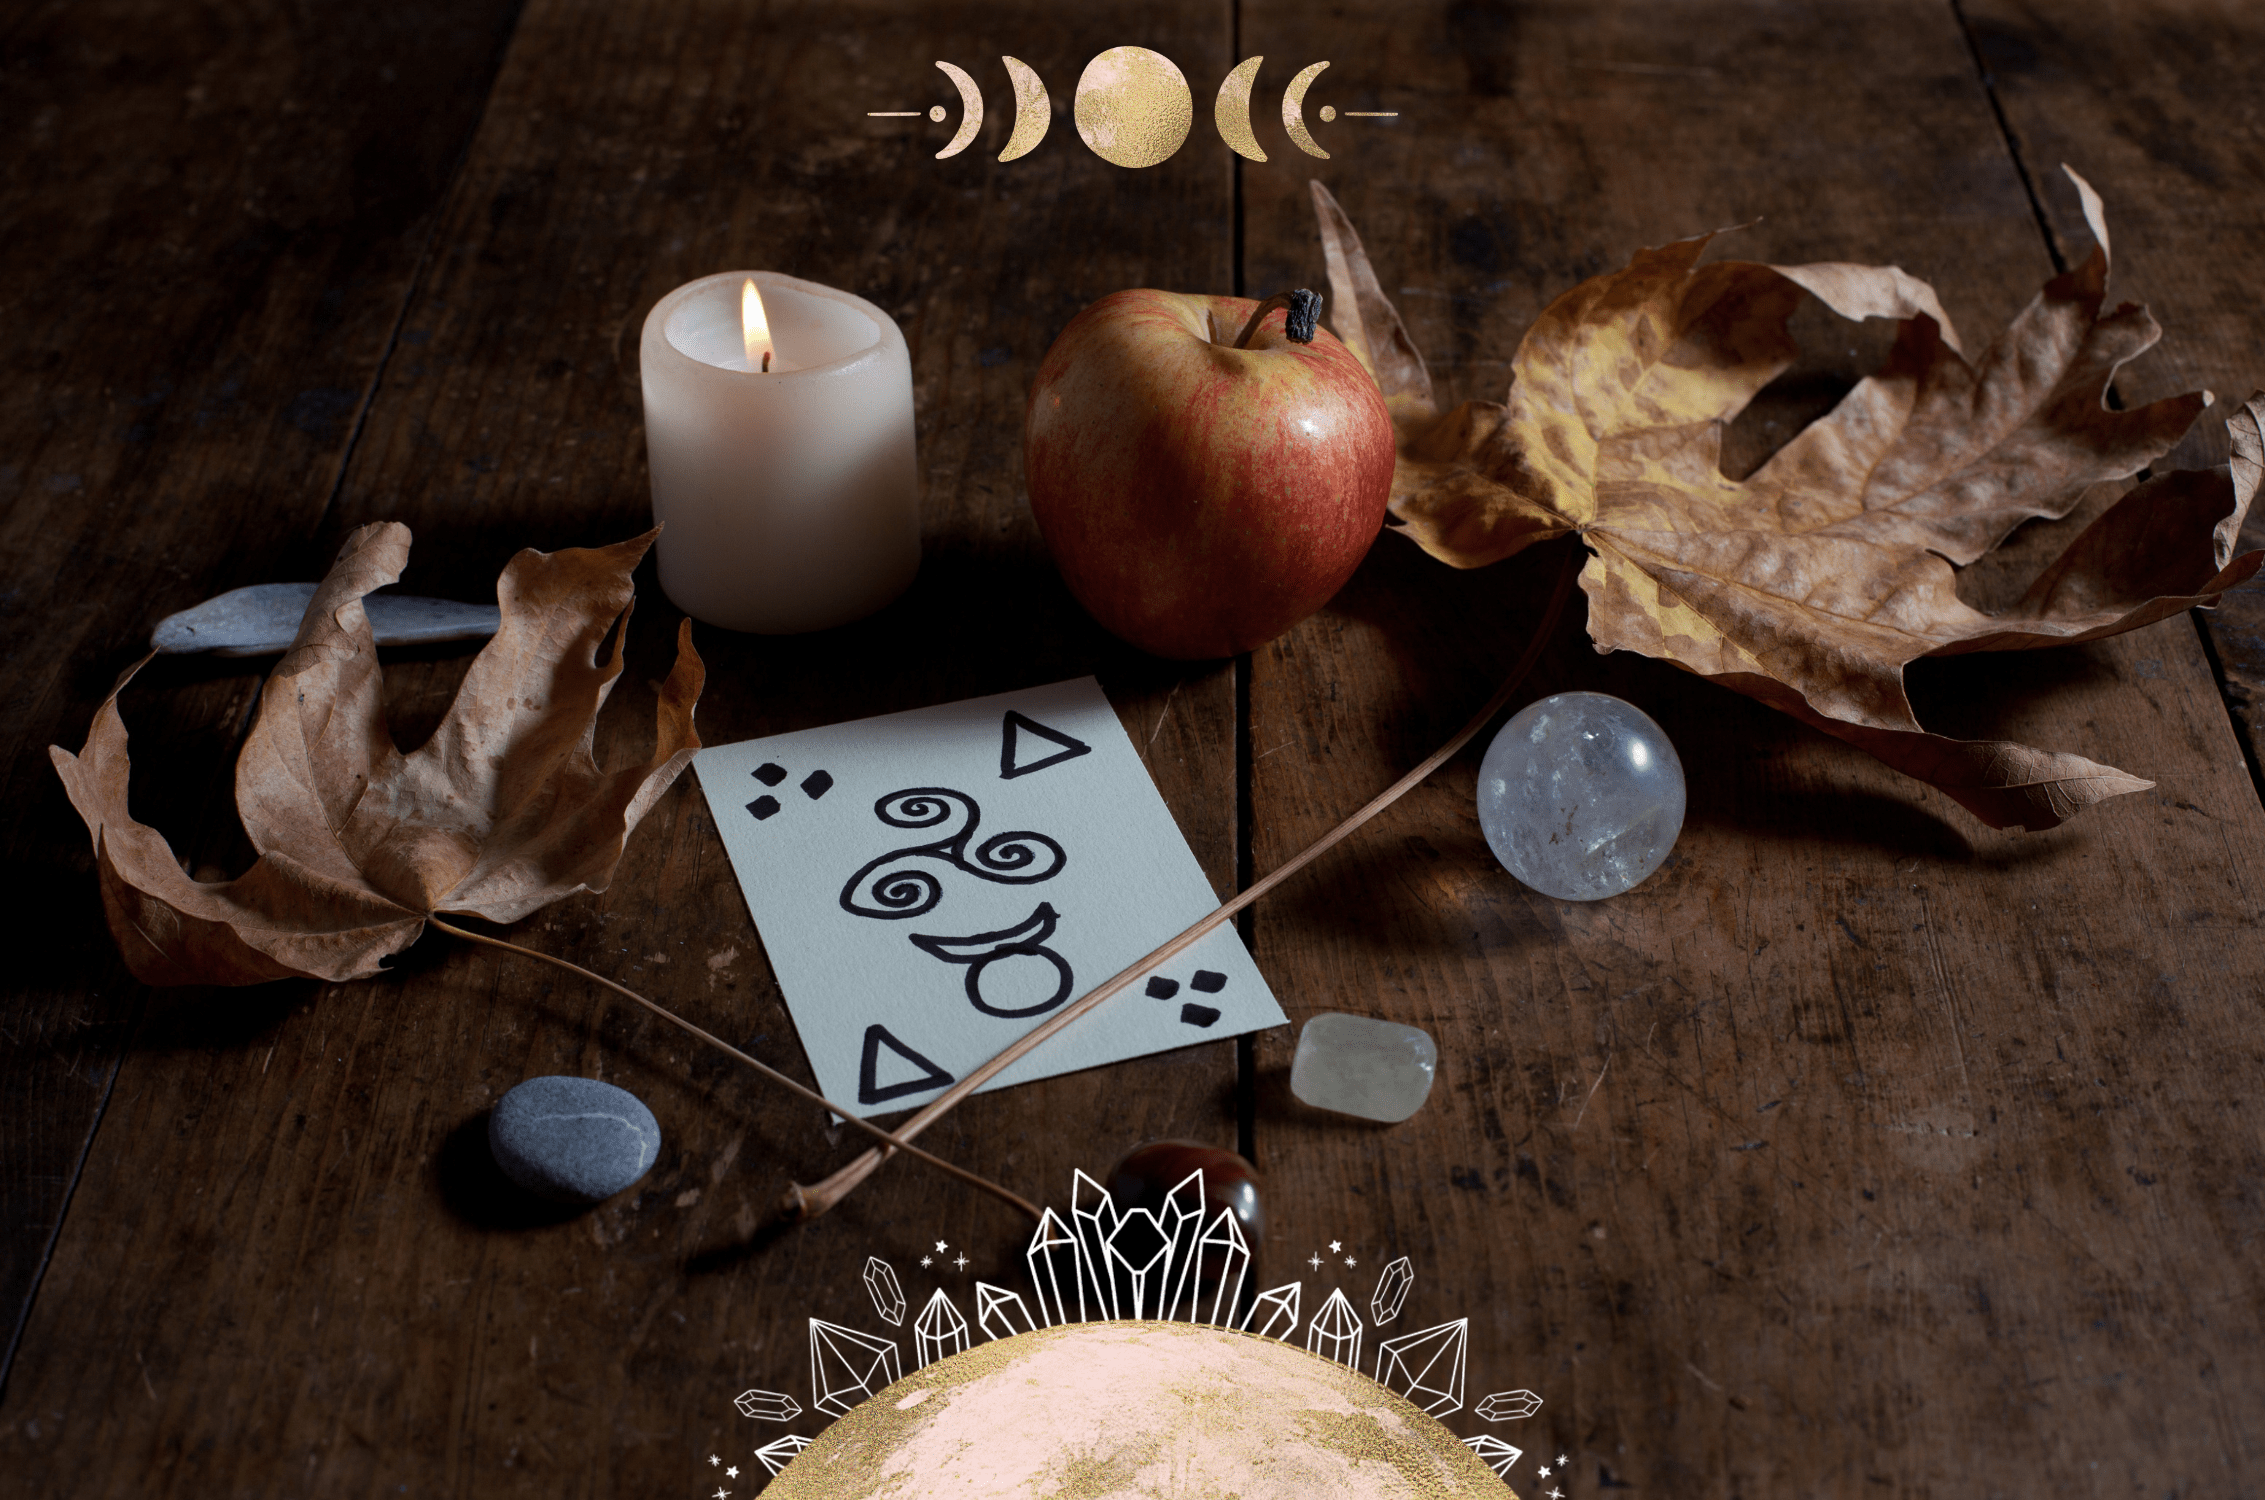 The Autumn Equinox Mabon And The Wheel Of The Year Love And Light